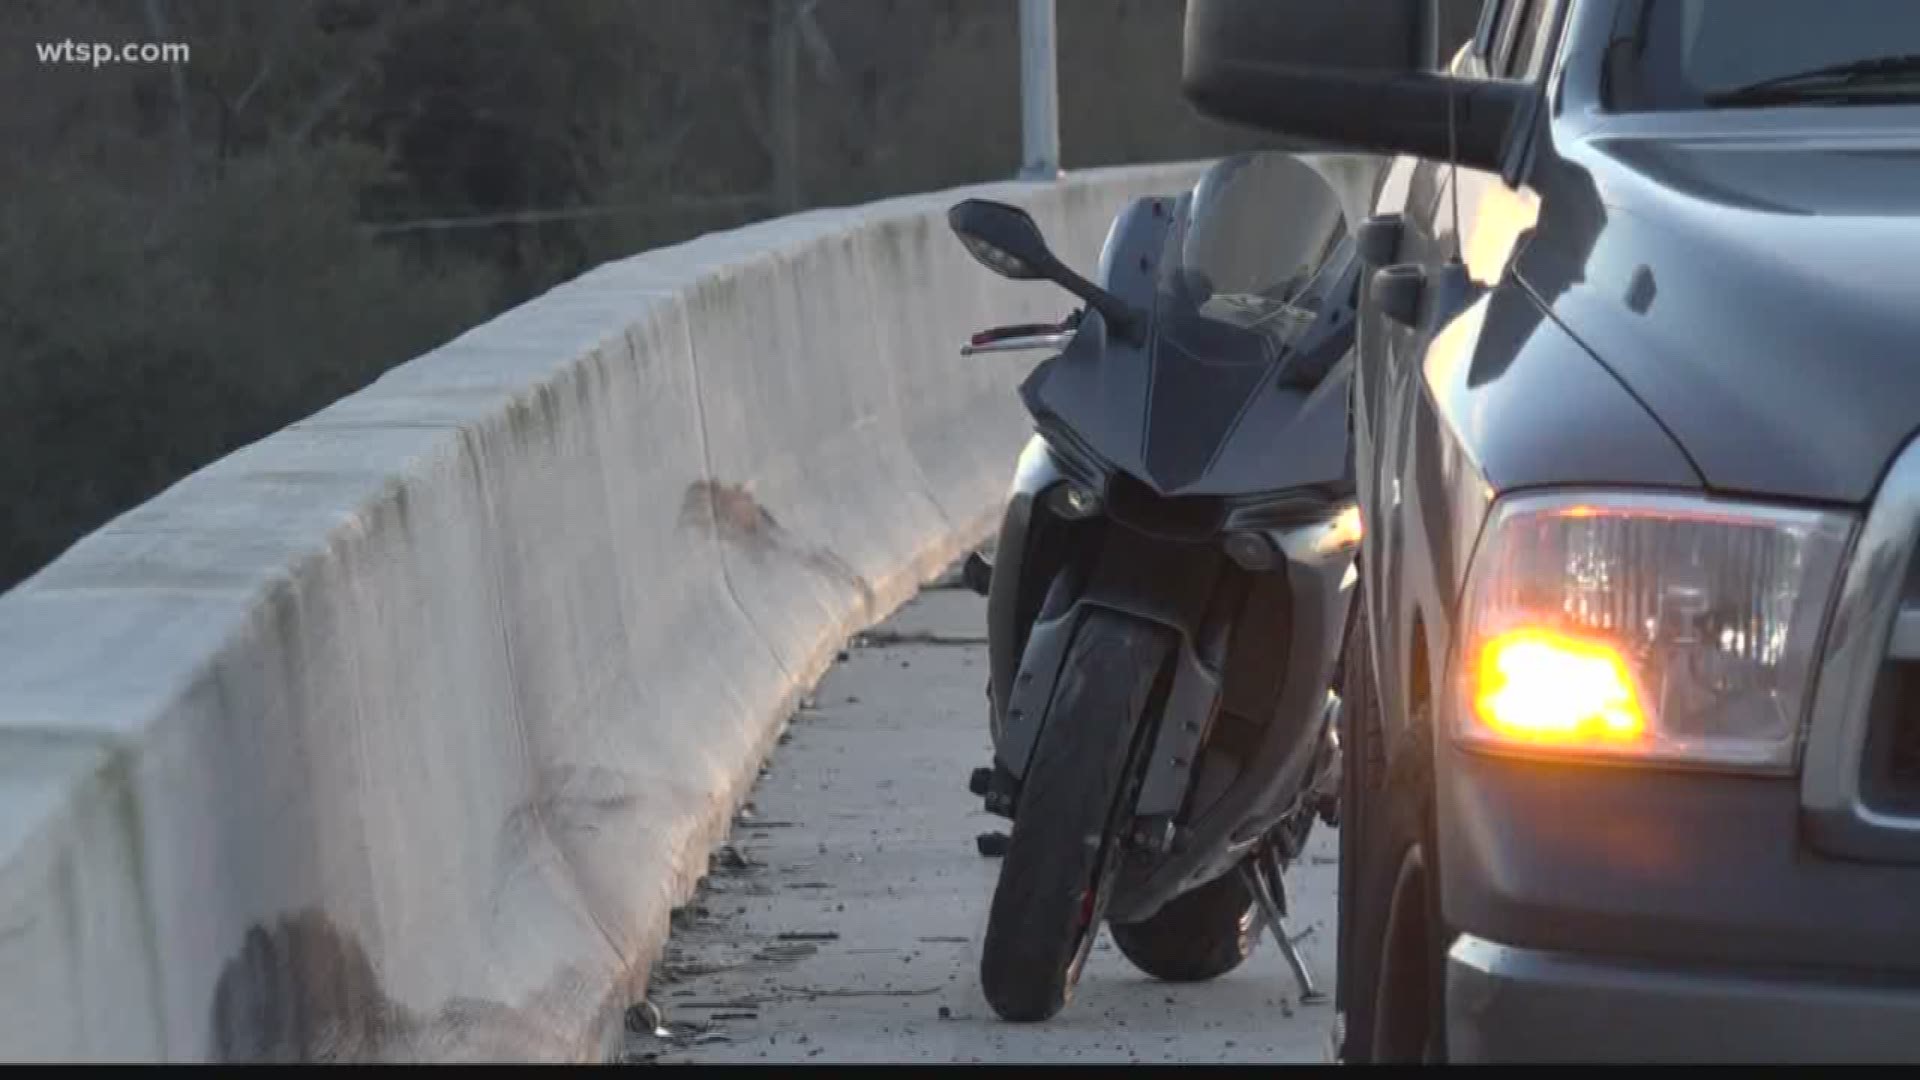 Troopers say the cyclist rode off, abandoning his passenger, after striking another motorcycle, sending its driver off an overpass.